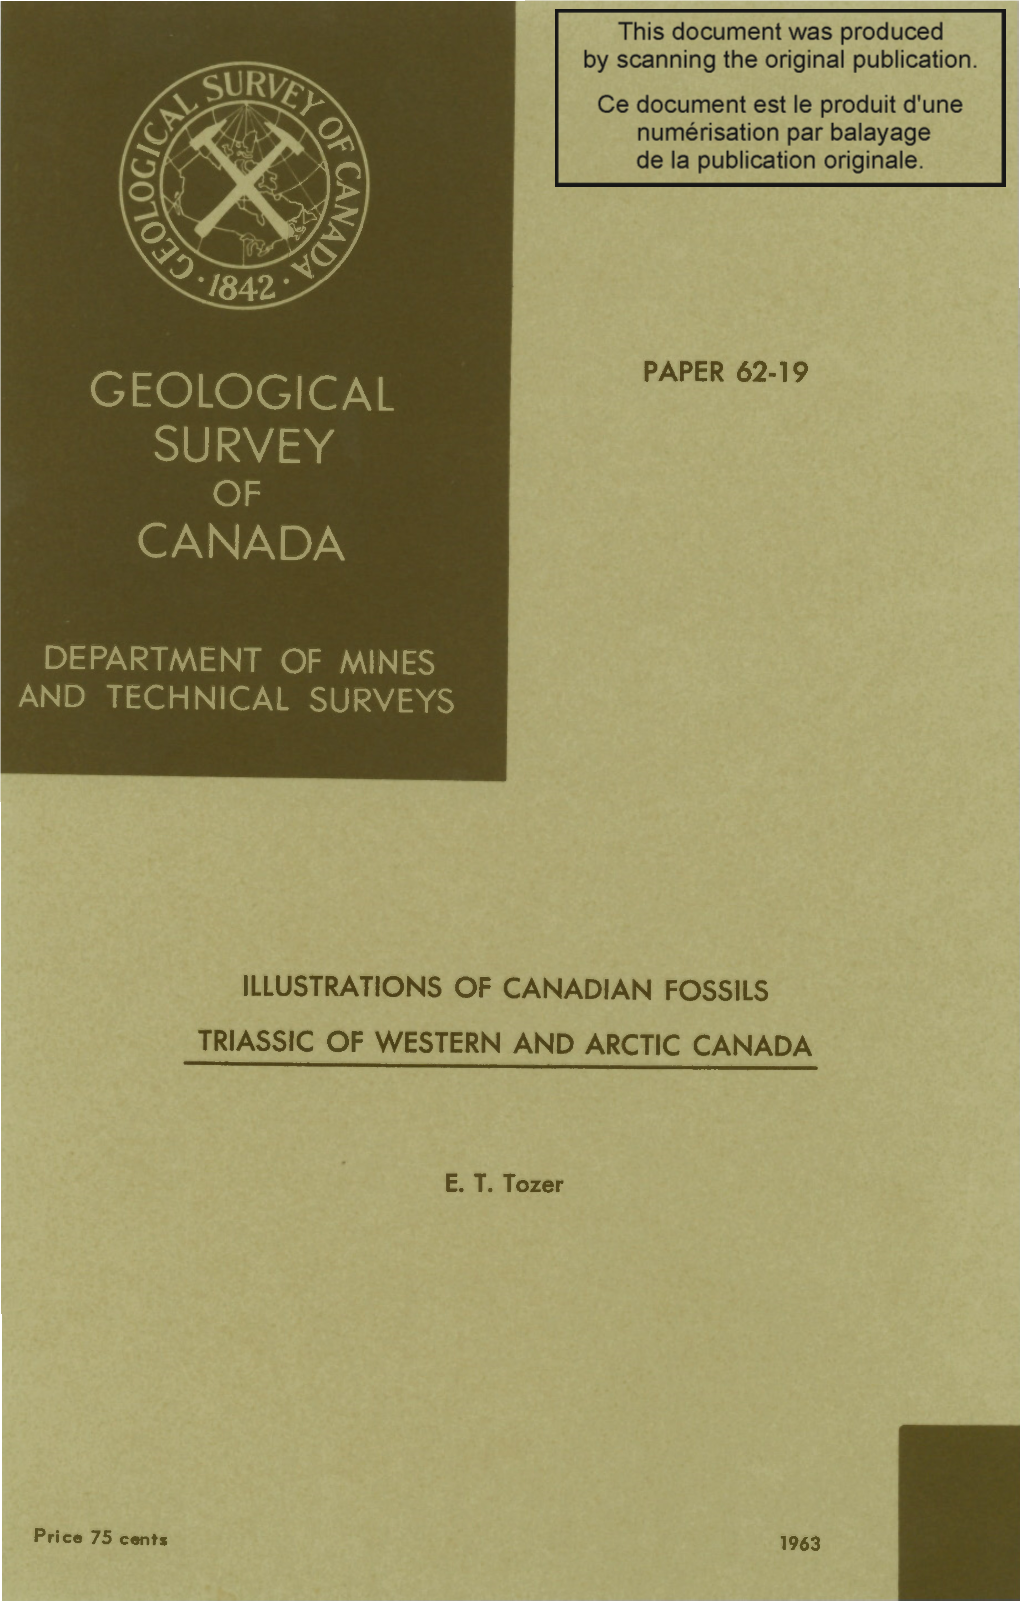 Illustrations of Canadian Fossils Triassic of Western and Arctic Canada